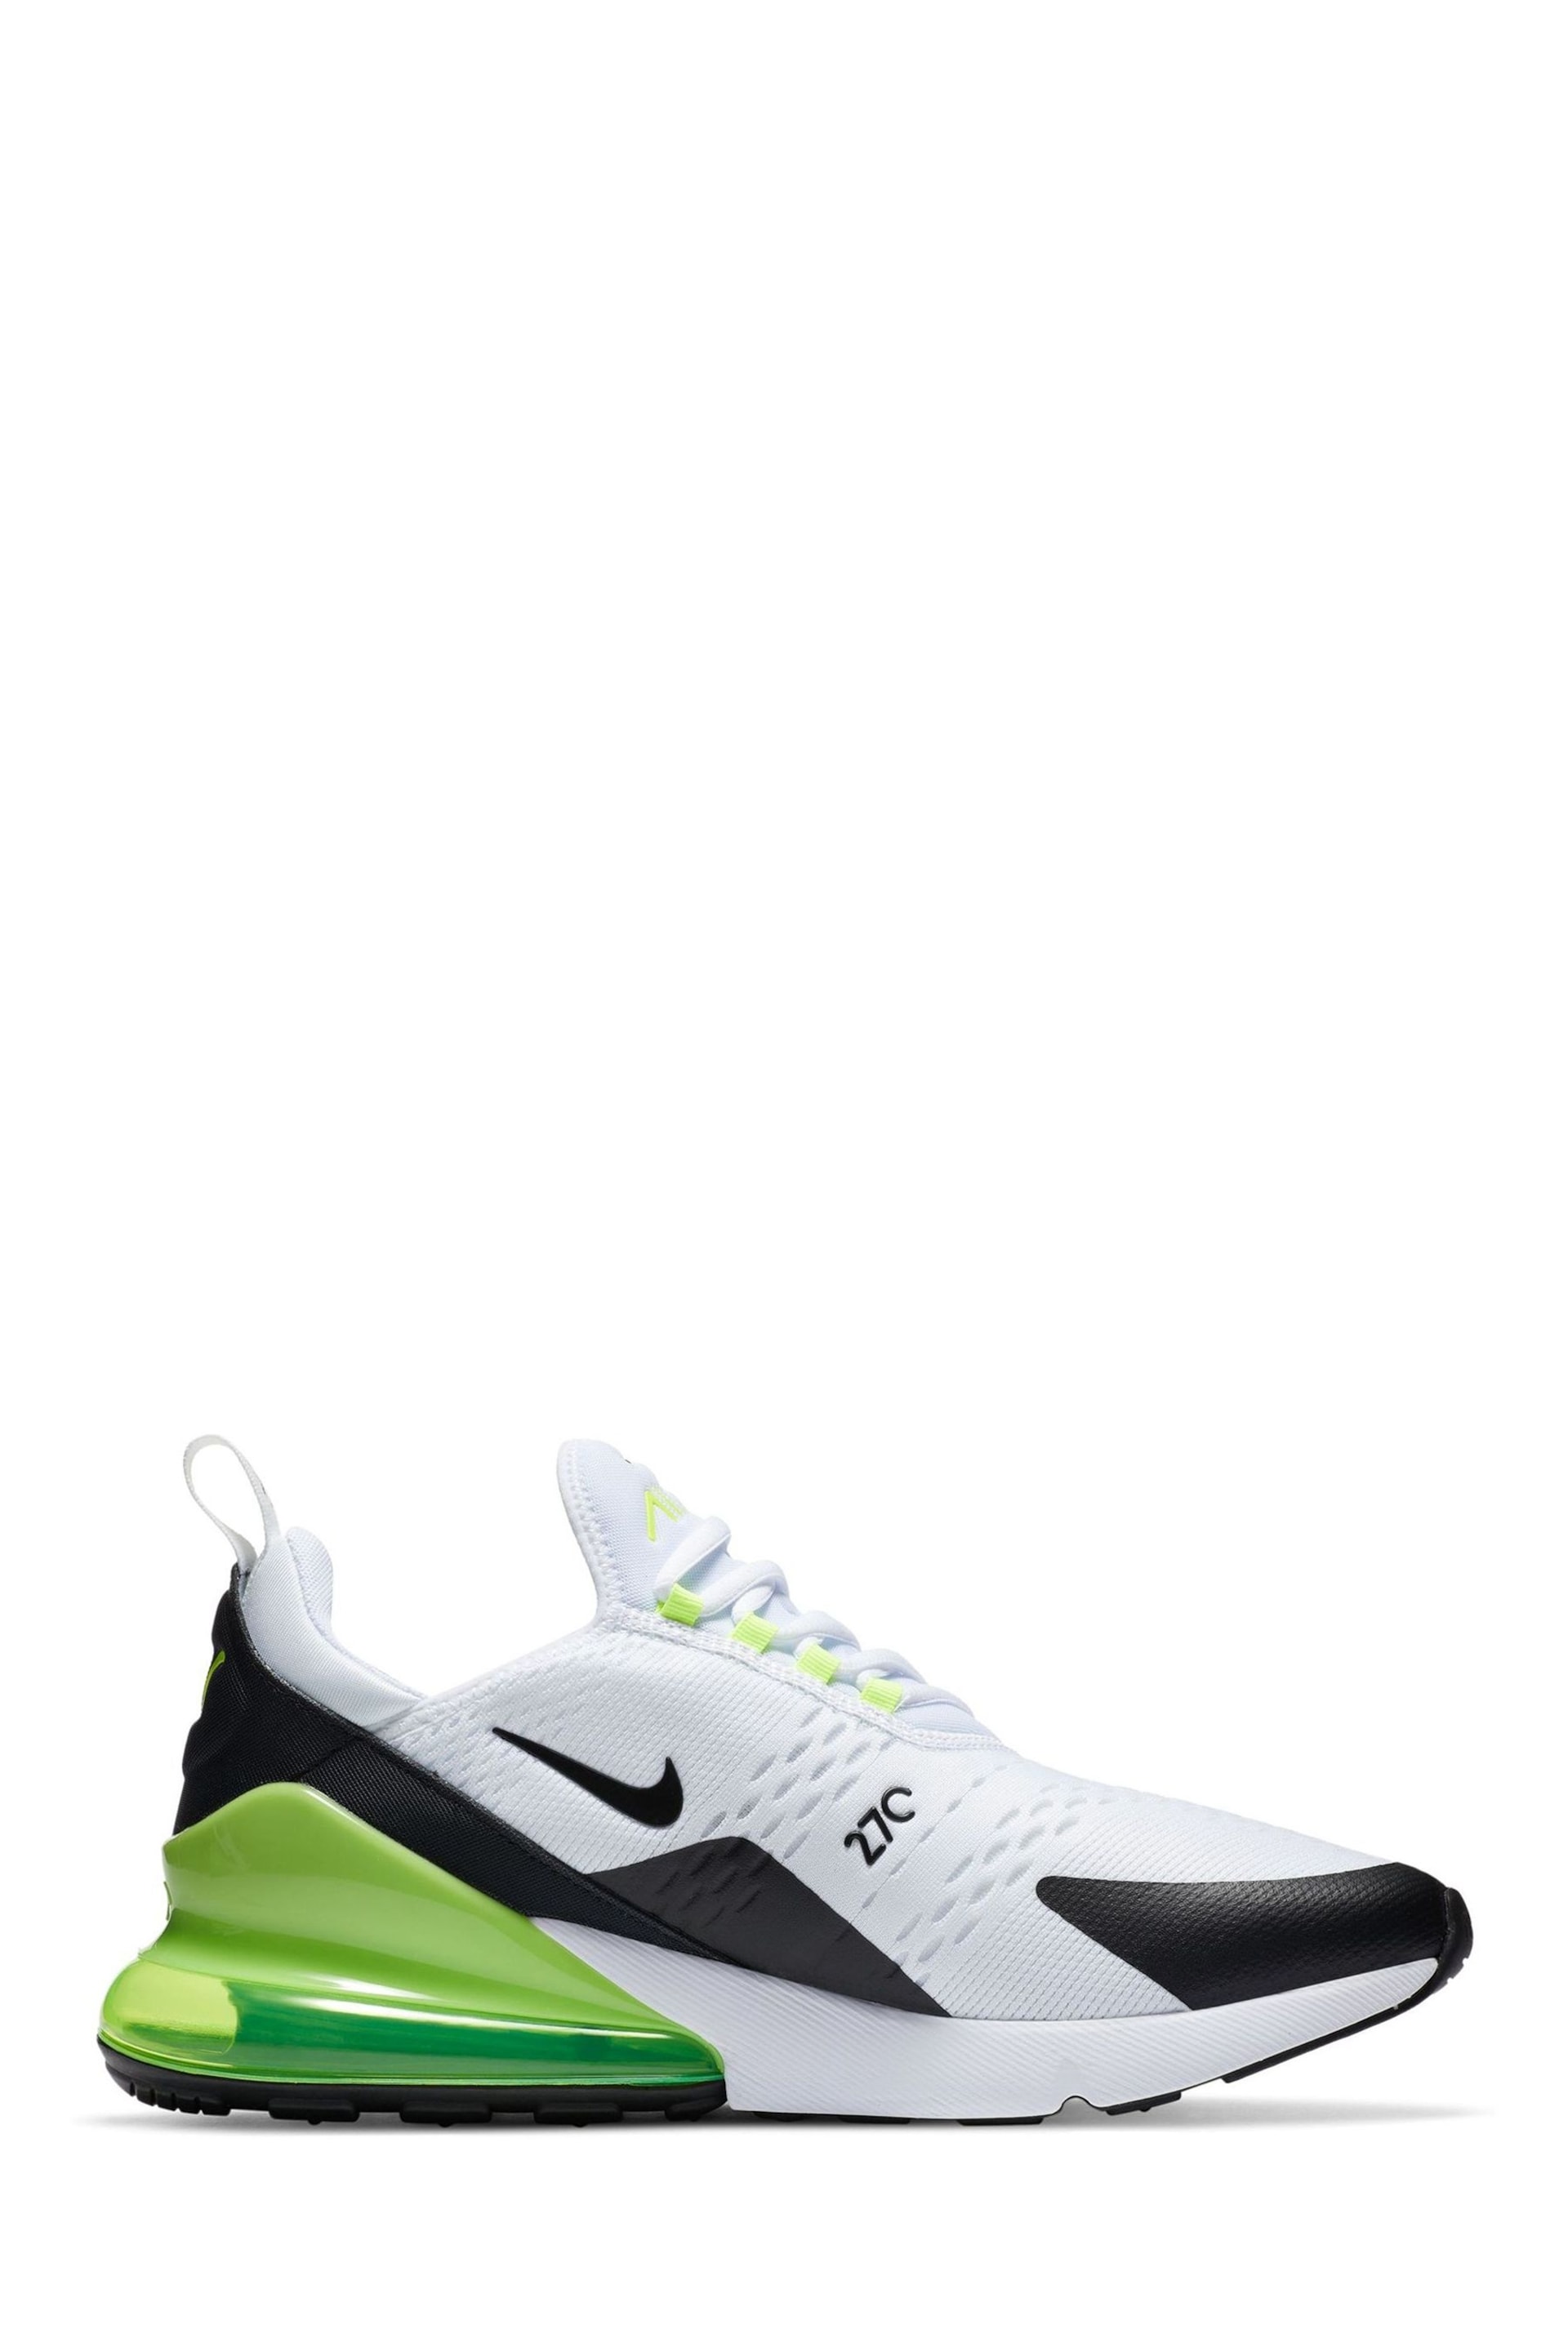 Nike Green/White Air Max 270 Trainers - Image 3 of 10